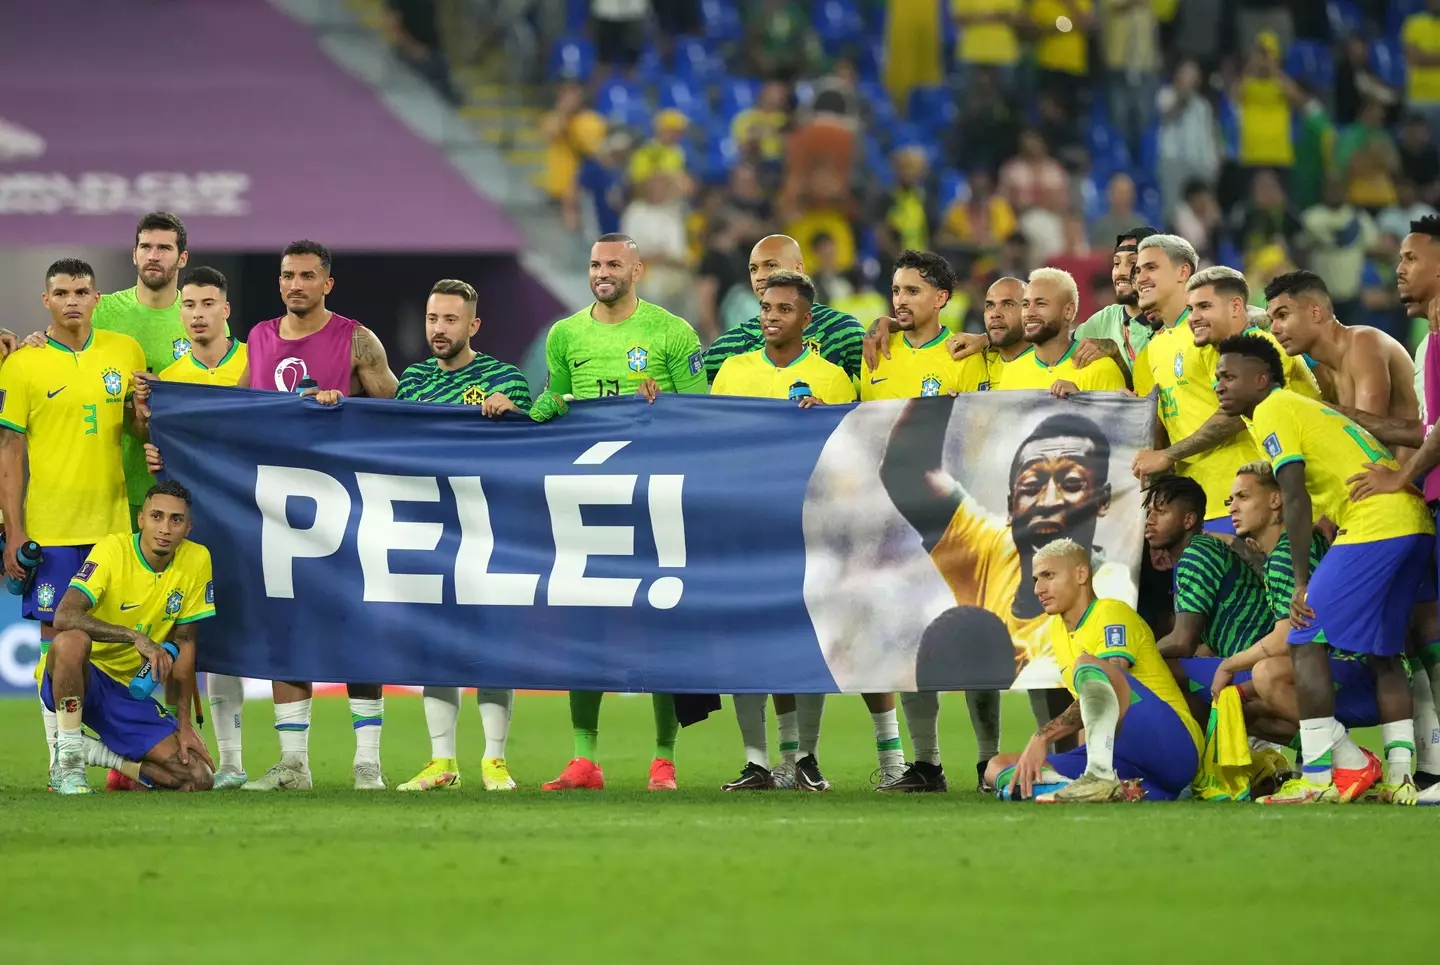 Brazil players hold up a Pele banner following their win over South Korea. Image: Alamy 